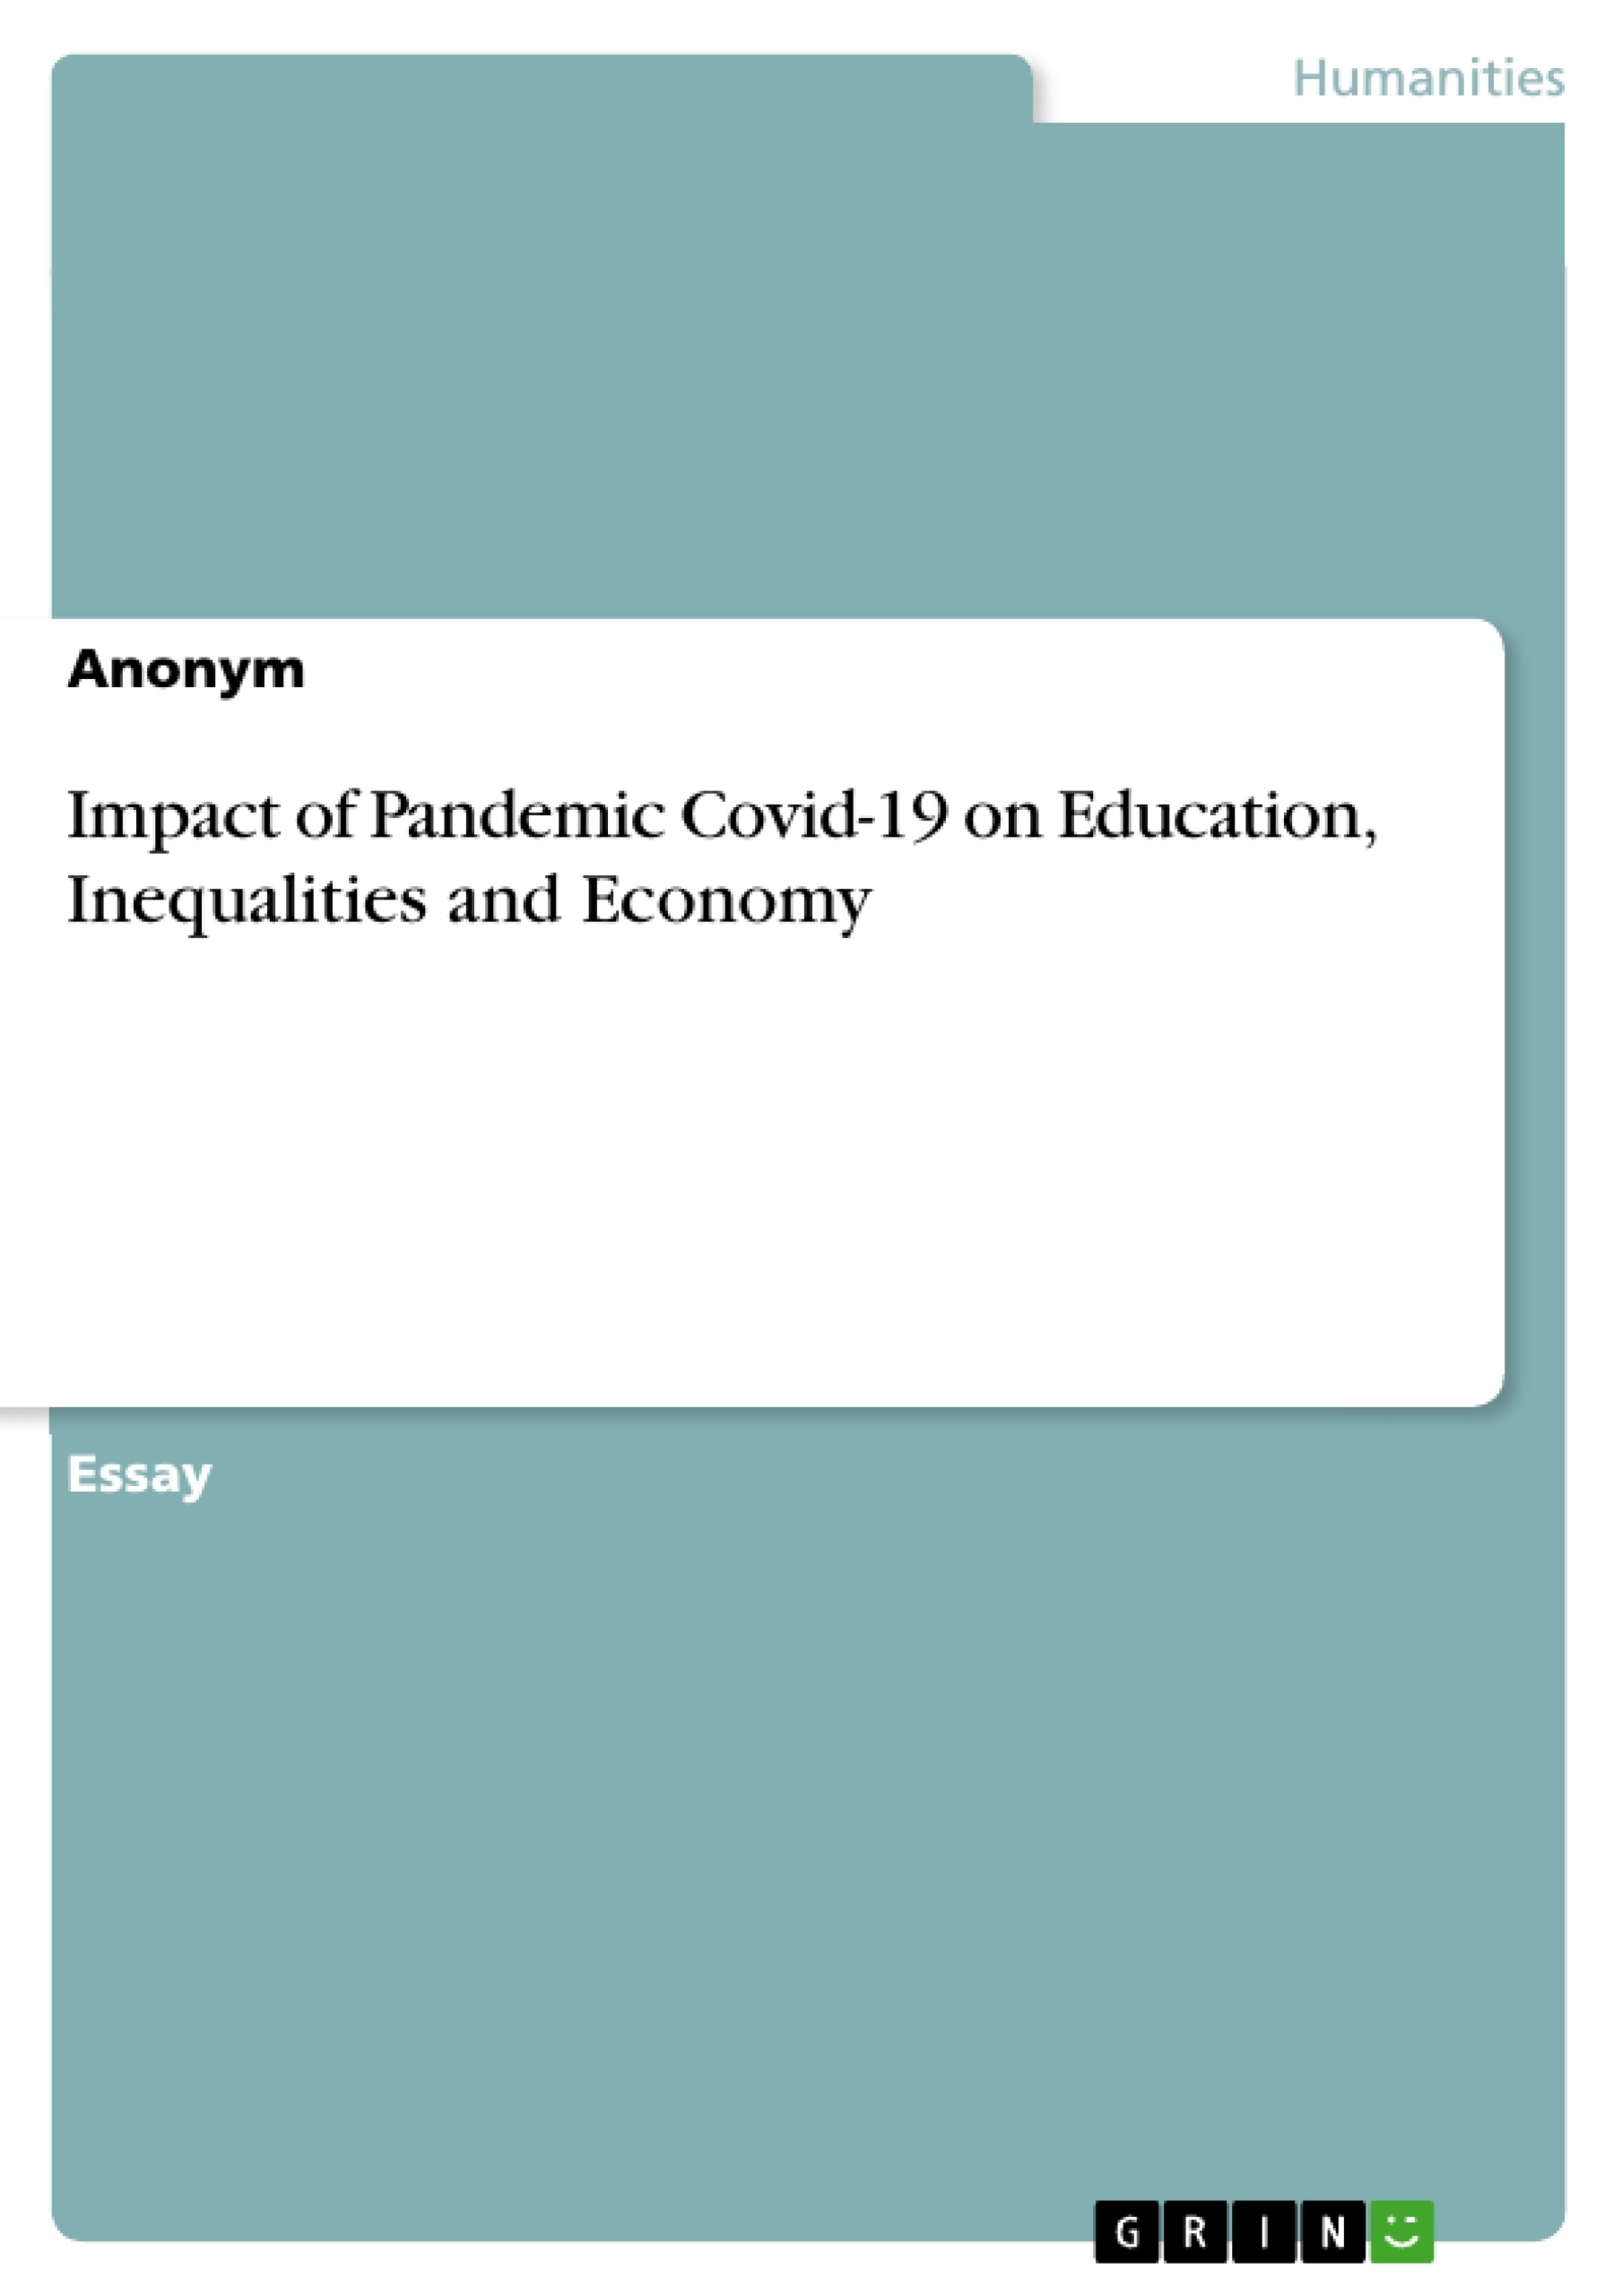 Title: Impact of Pandemic Covid-19 on Education, Inequalities and Economy